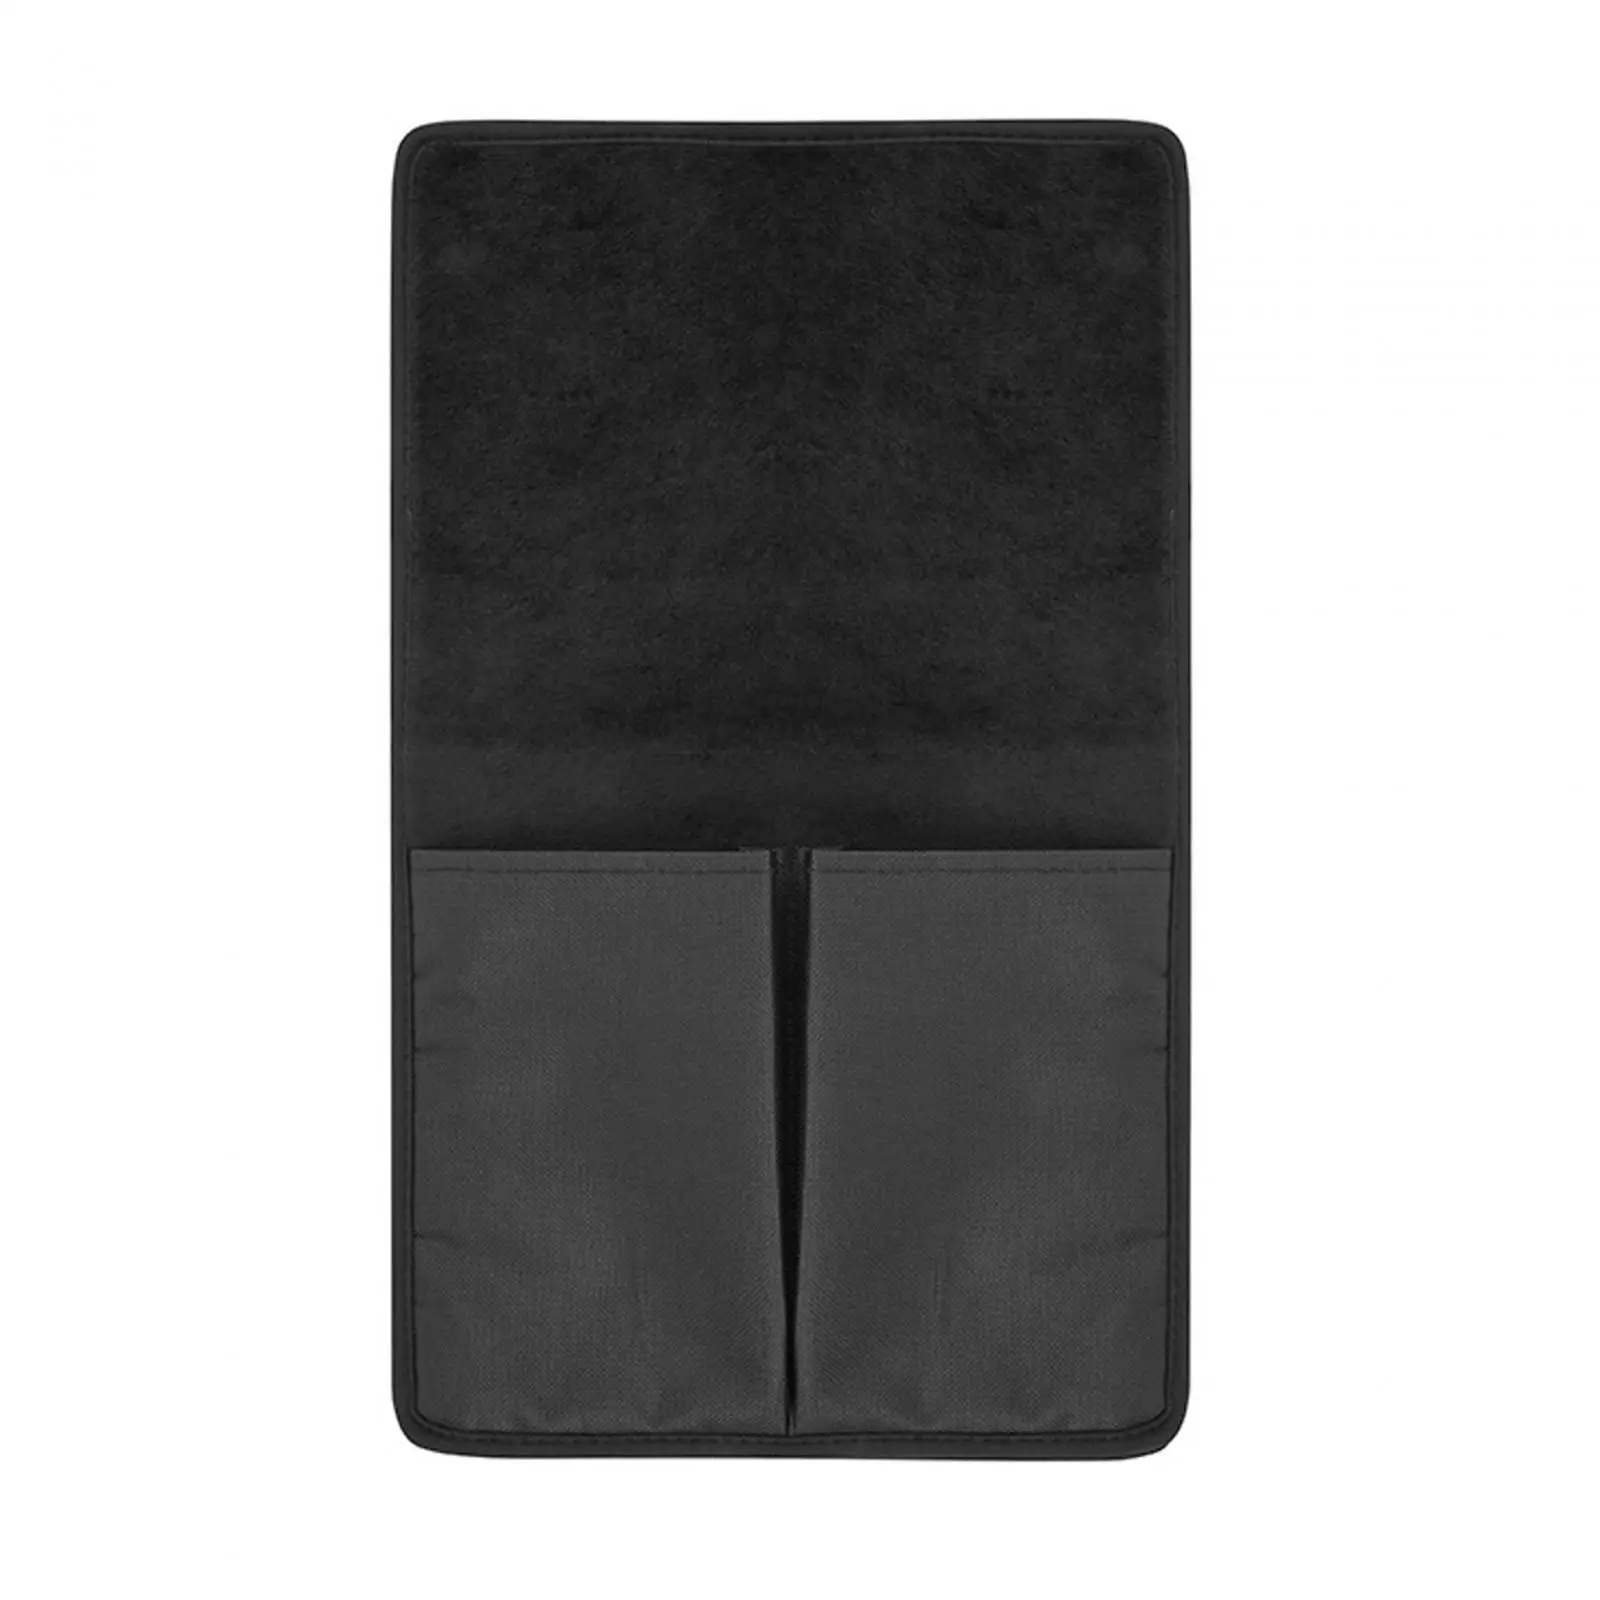 Wheelchair Armrest Pouch Cup Holder Phone Holder Bag Accessories Pouch Chair Side Bag for Pen Remotes Glasses Phone Black